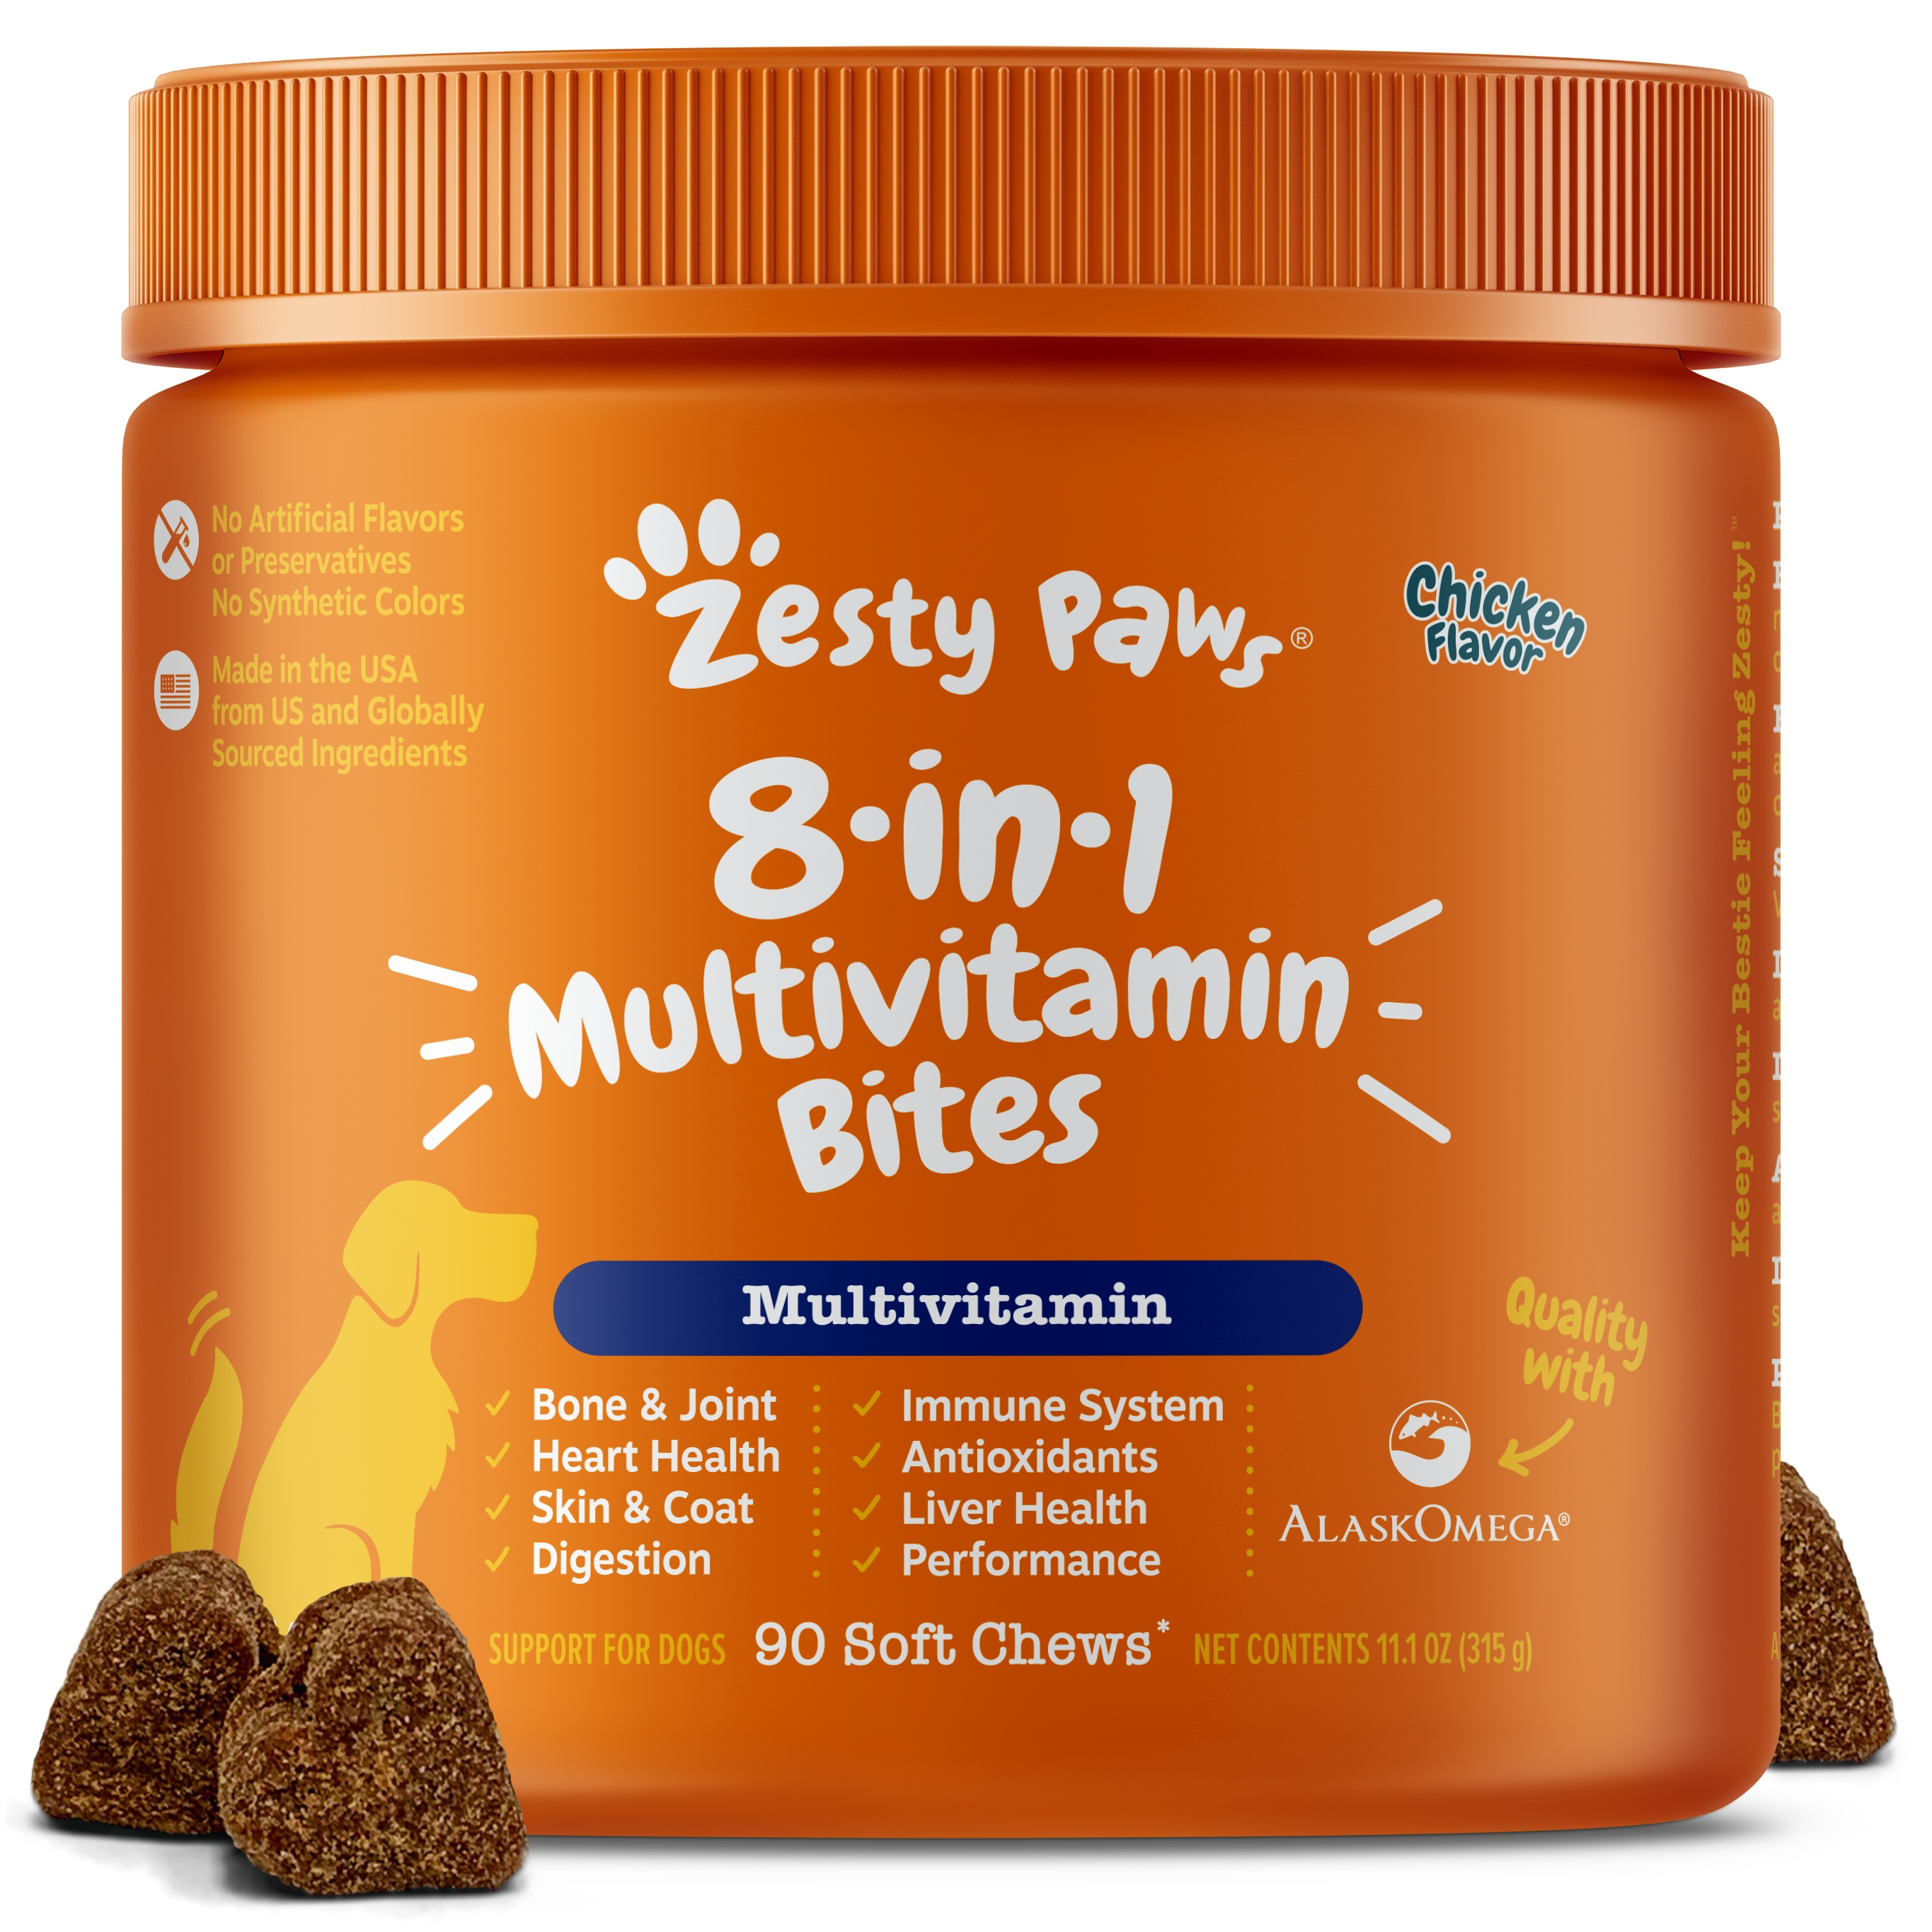 Best of the Zest 2-Pack for Dogs Bundle